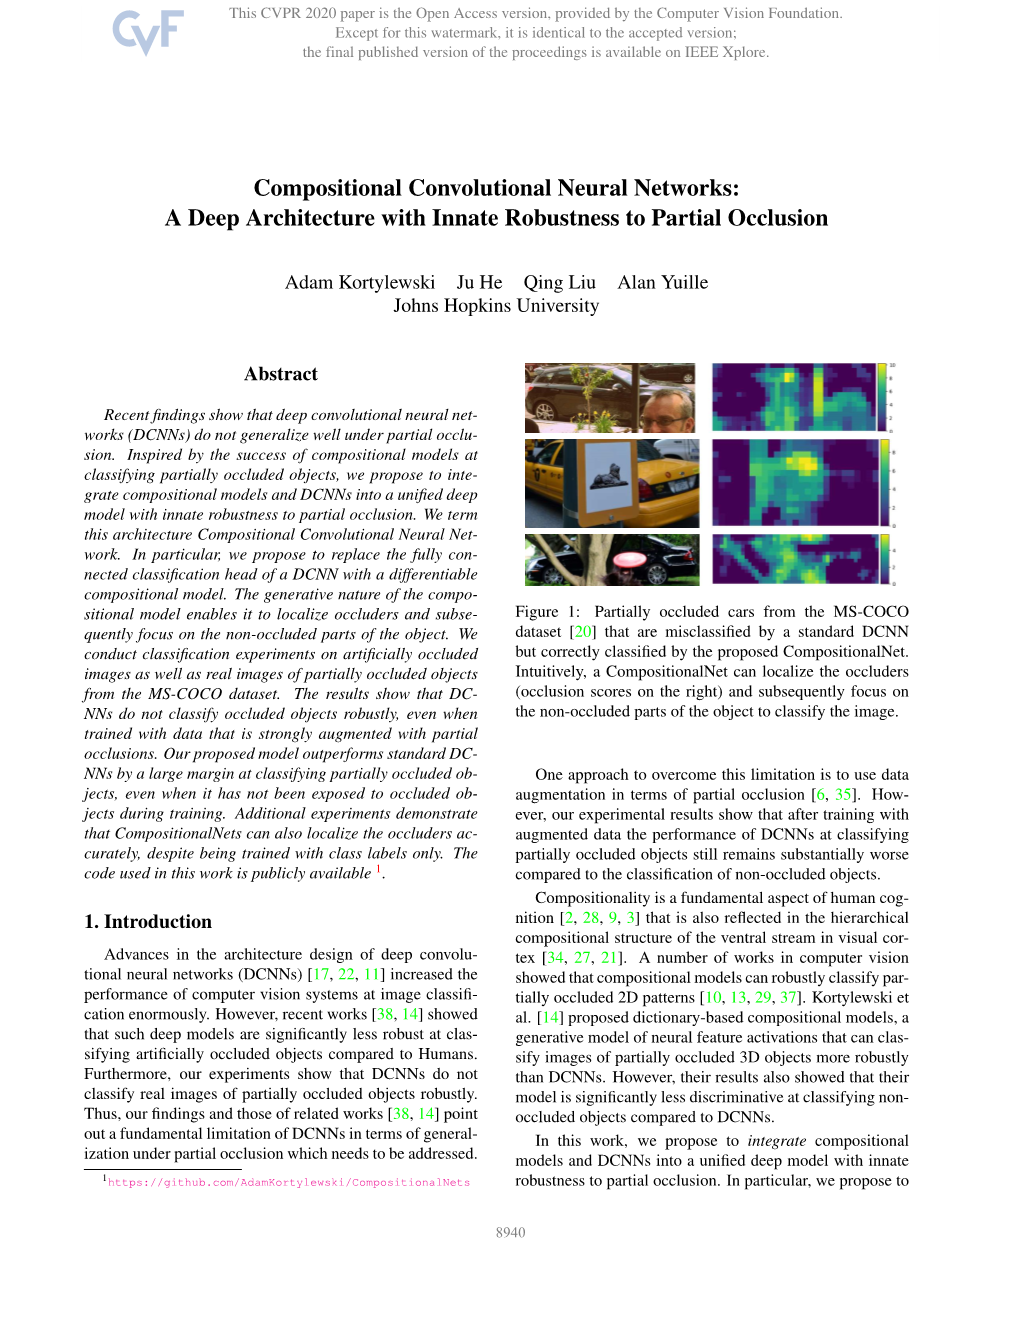 Compositional Convolutional Neural Networks: a Deep Architecture with Innate Robustness to Partial Occlusion